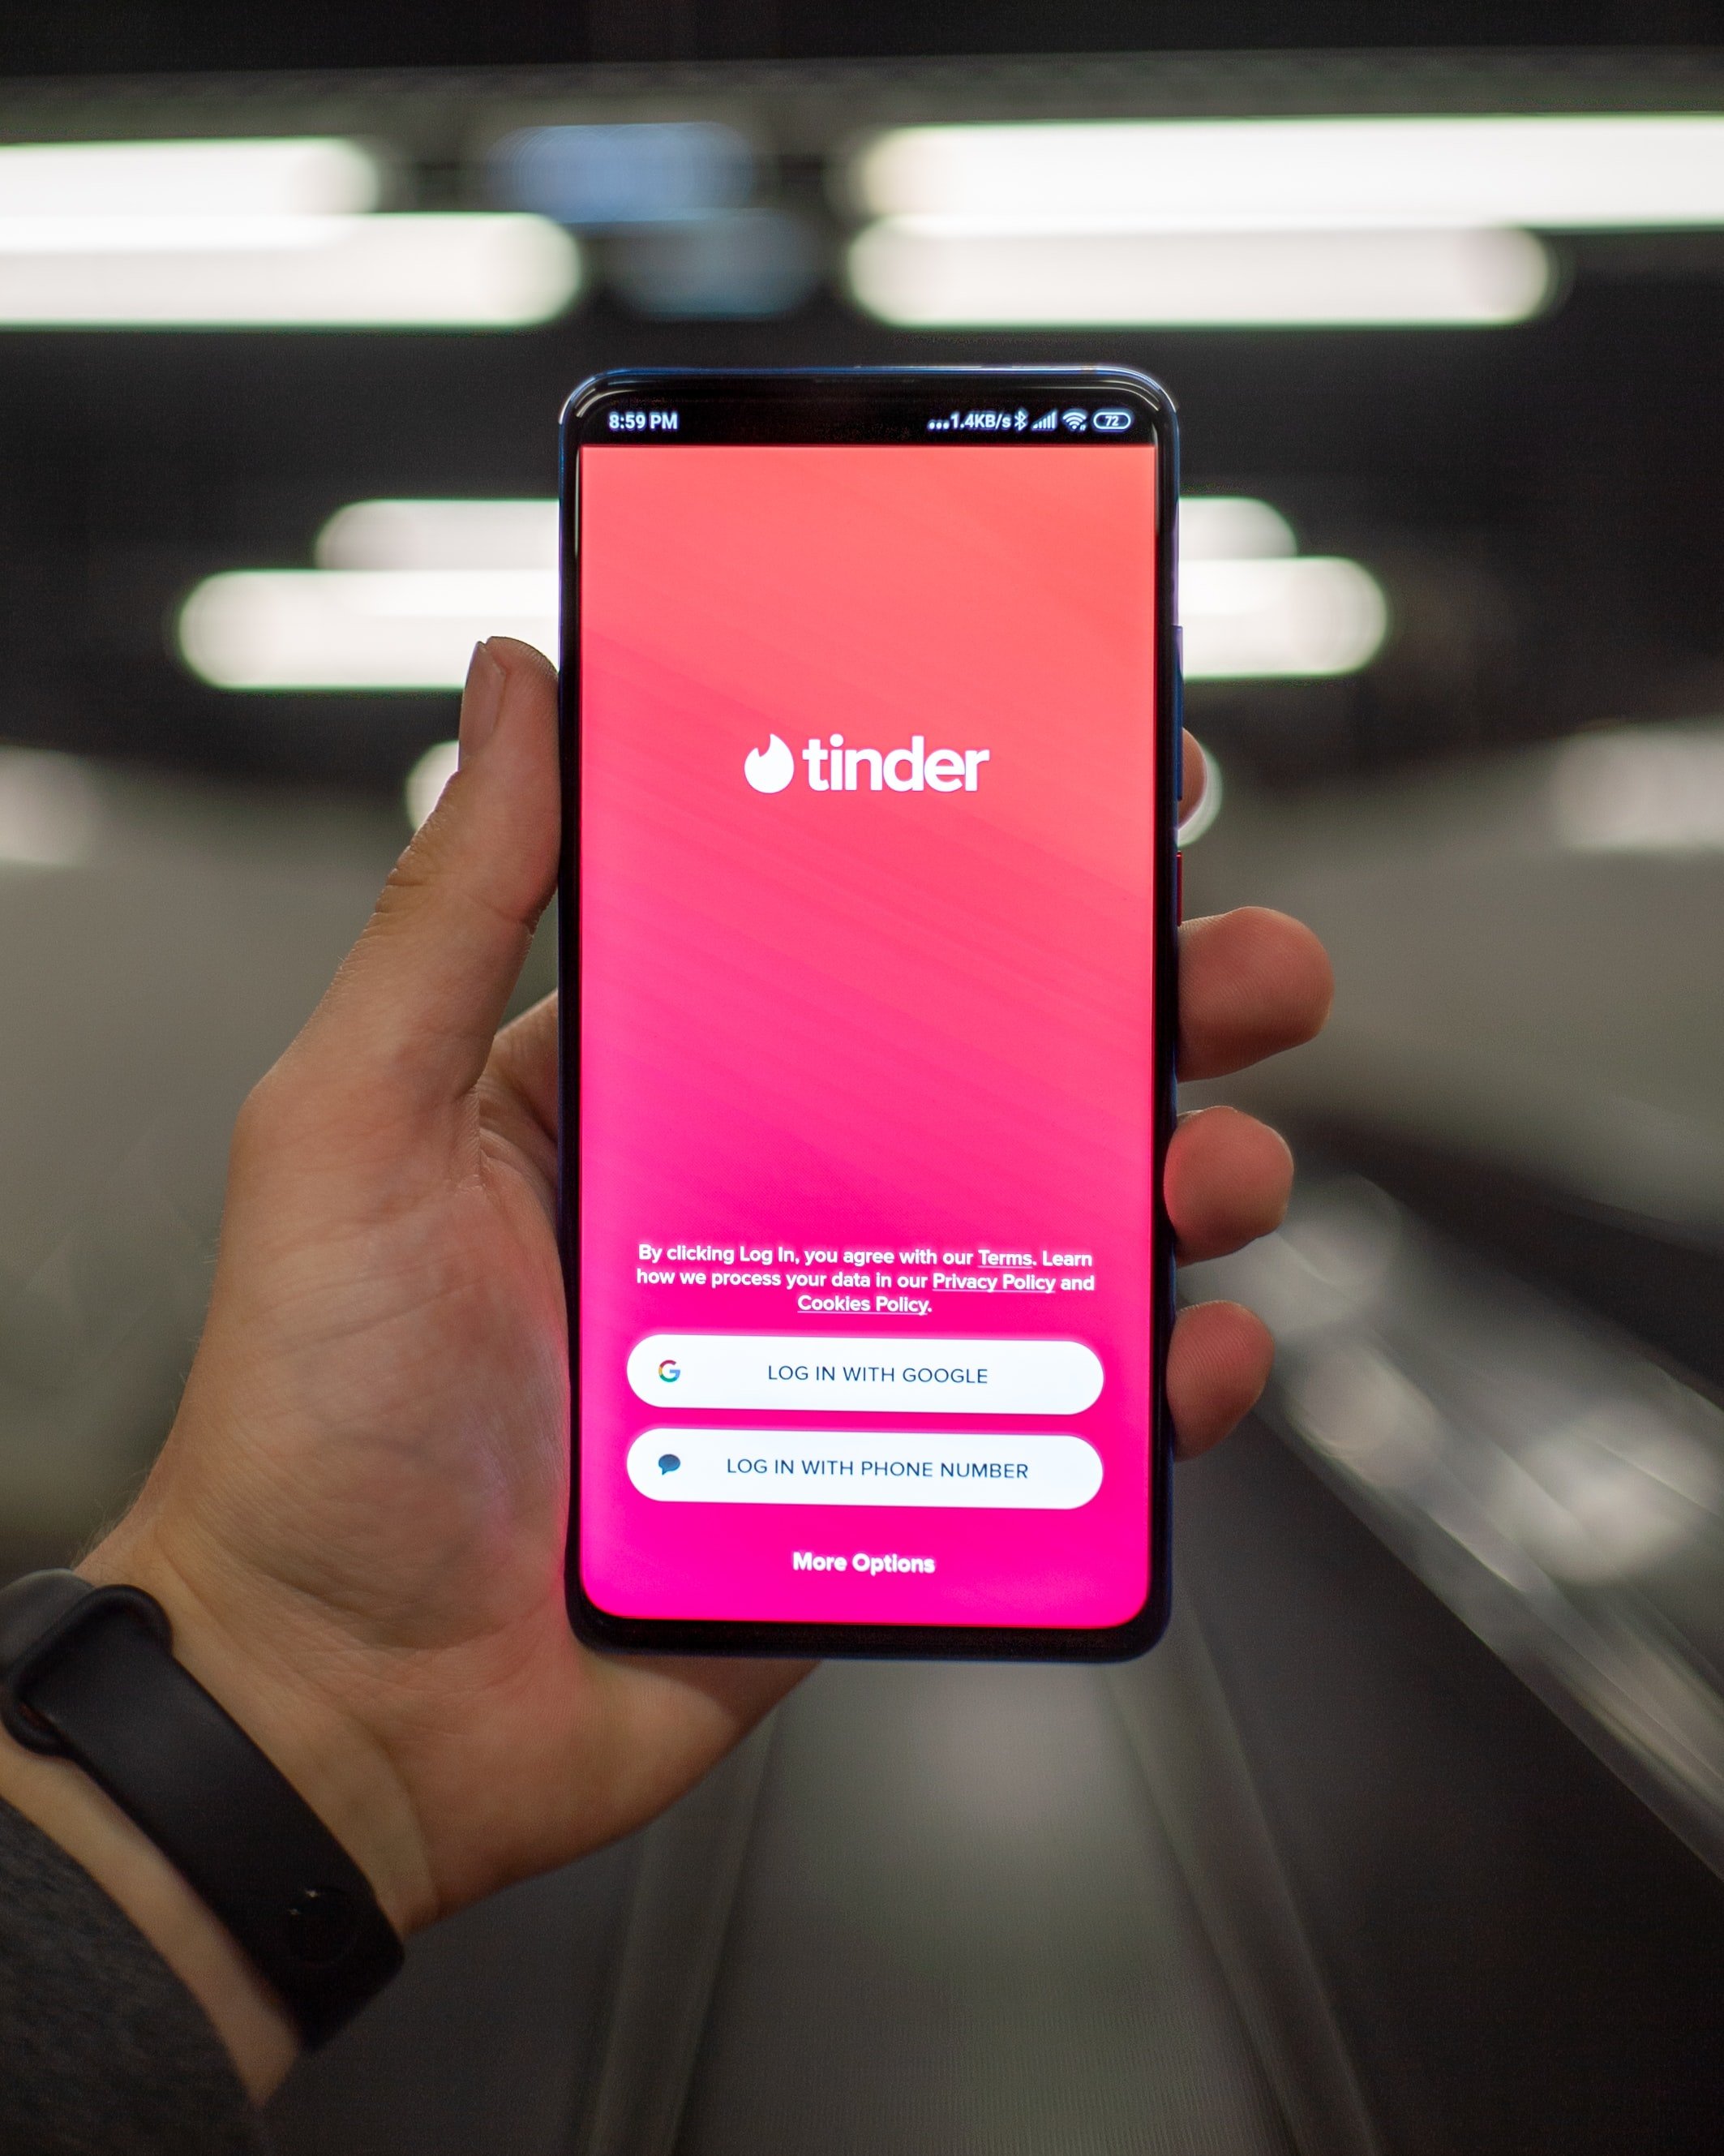 Online dating app Tinder is open on a phone screen | Photo: Unsplash/Mika Baumeister